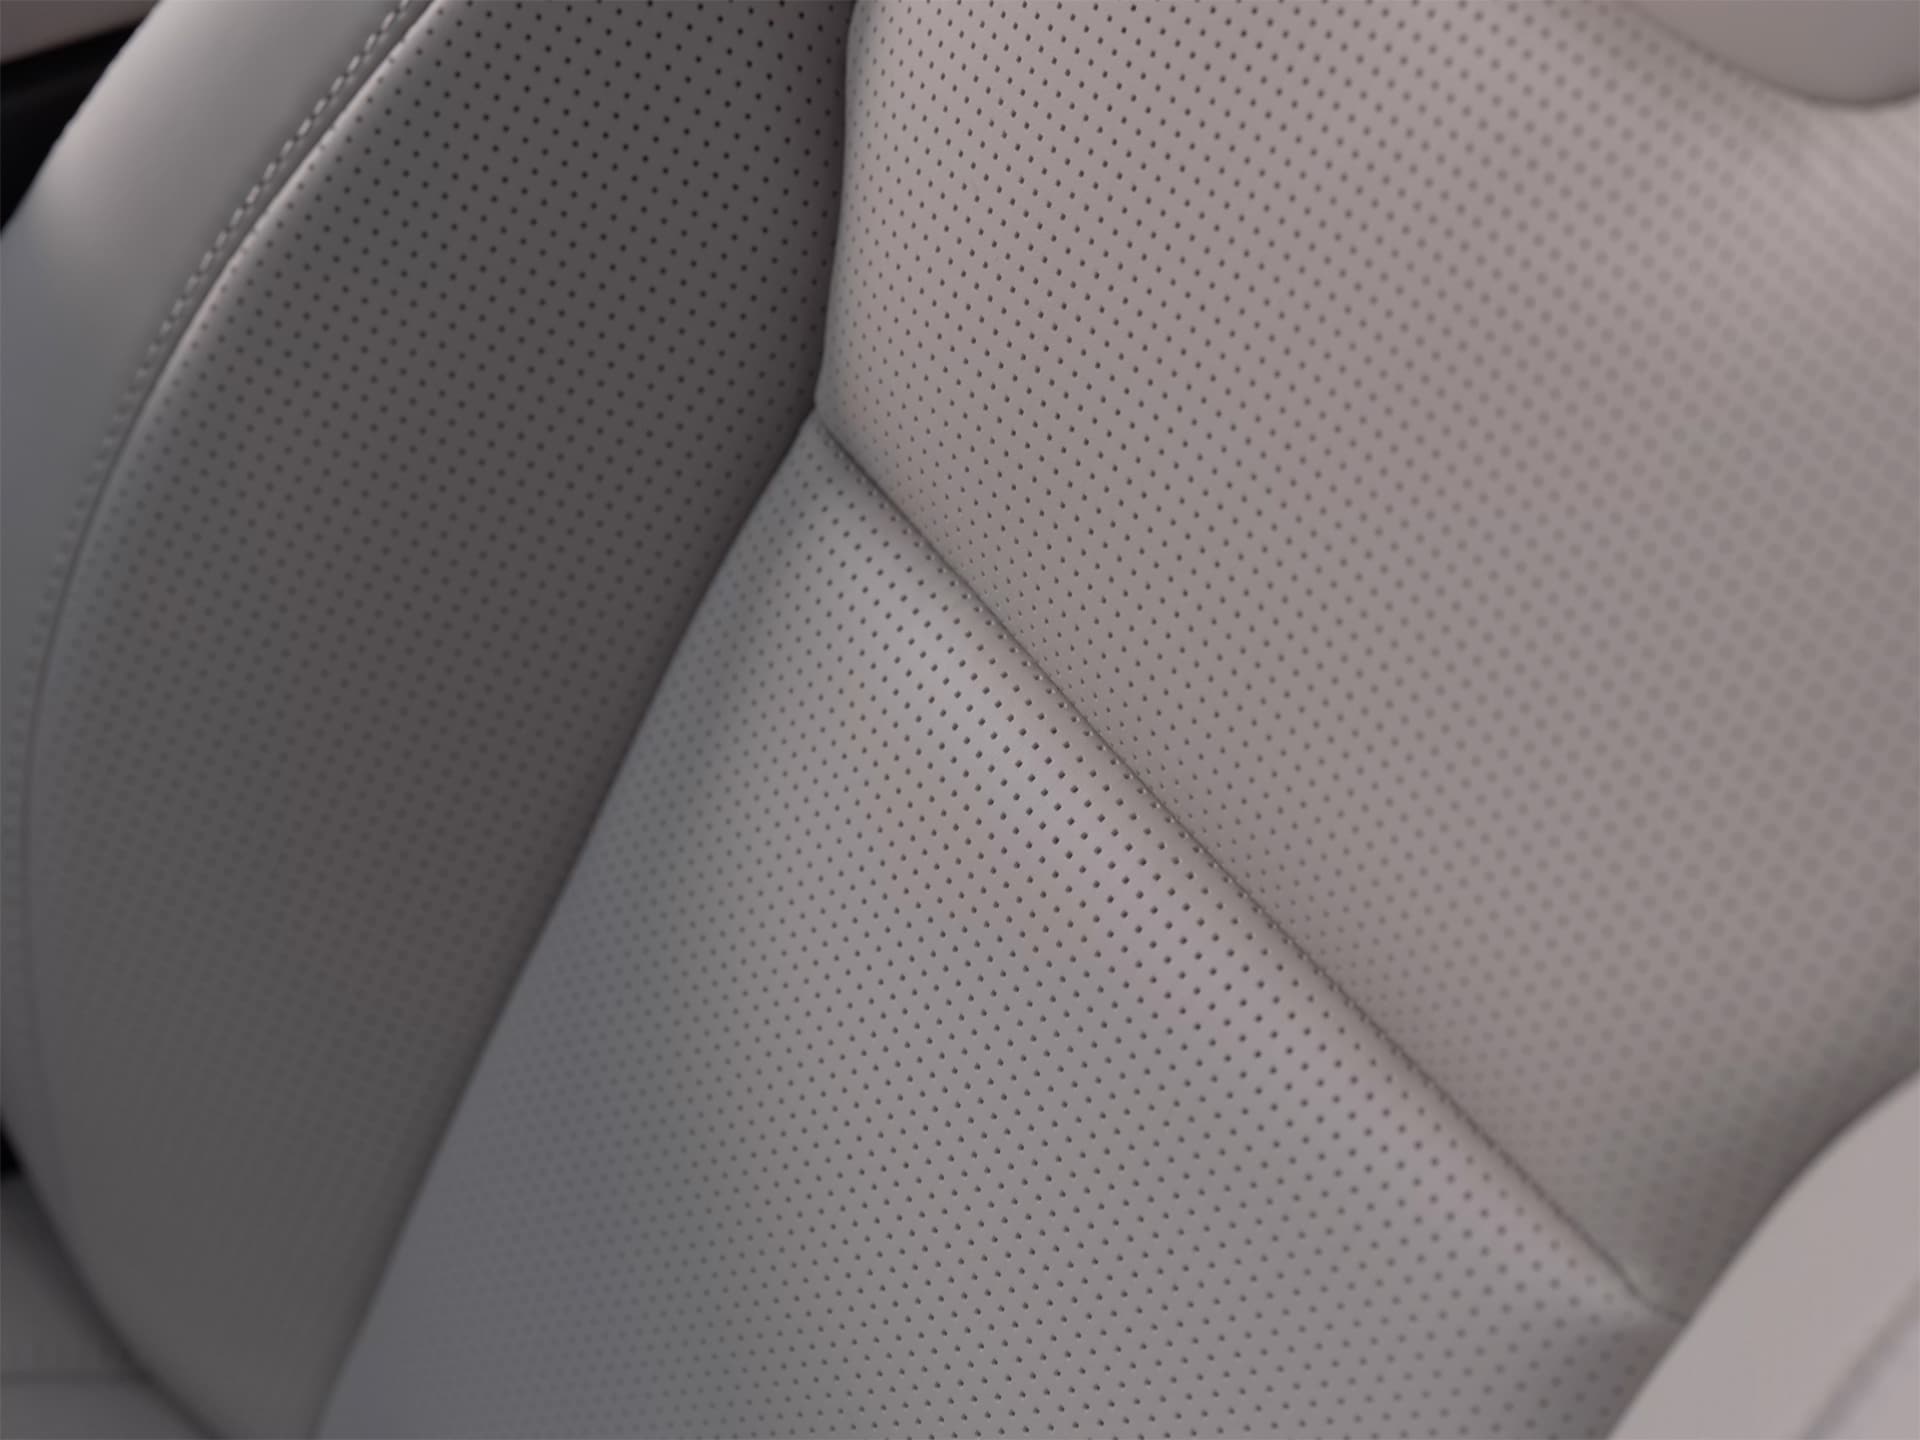 Nappa leather seats in a Volvo S90 Recharge.